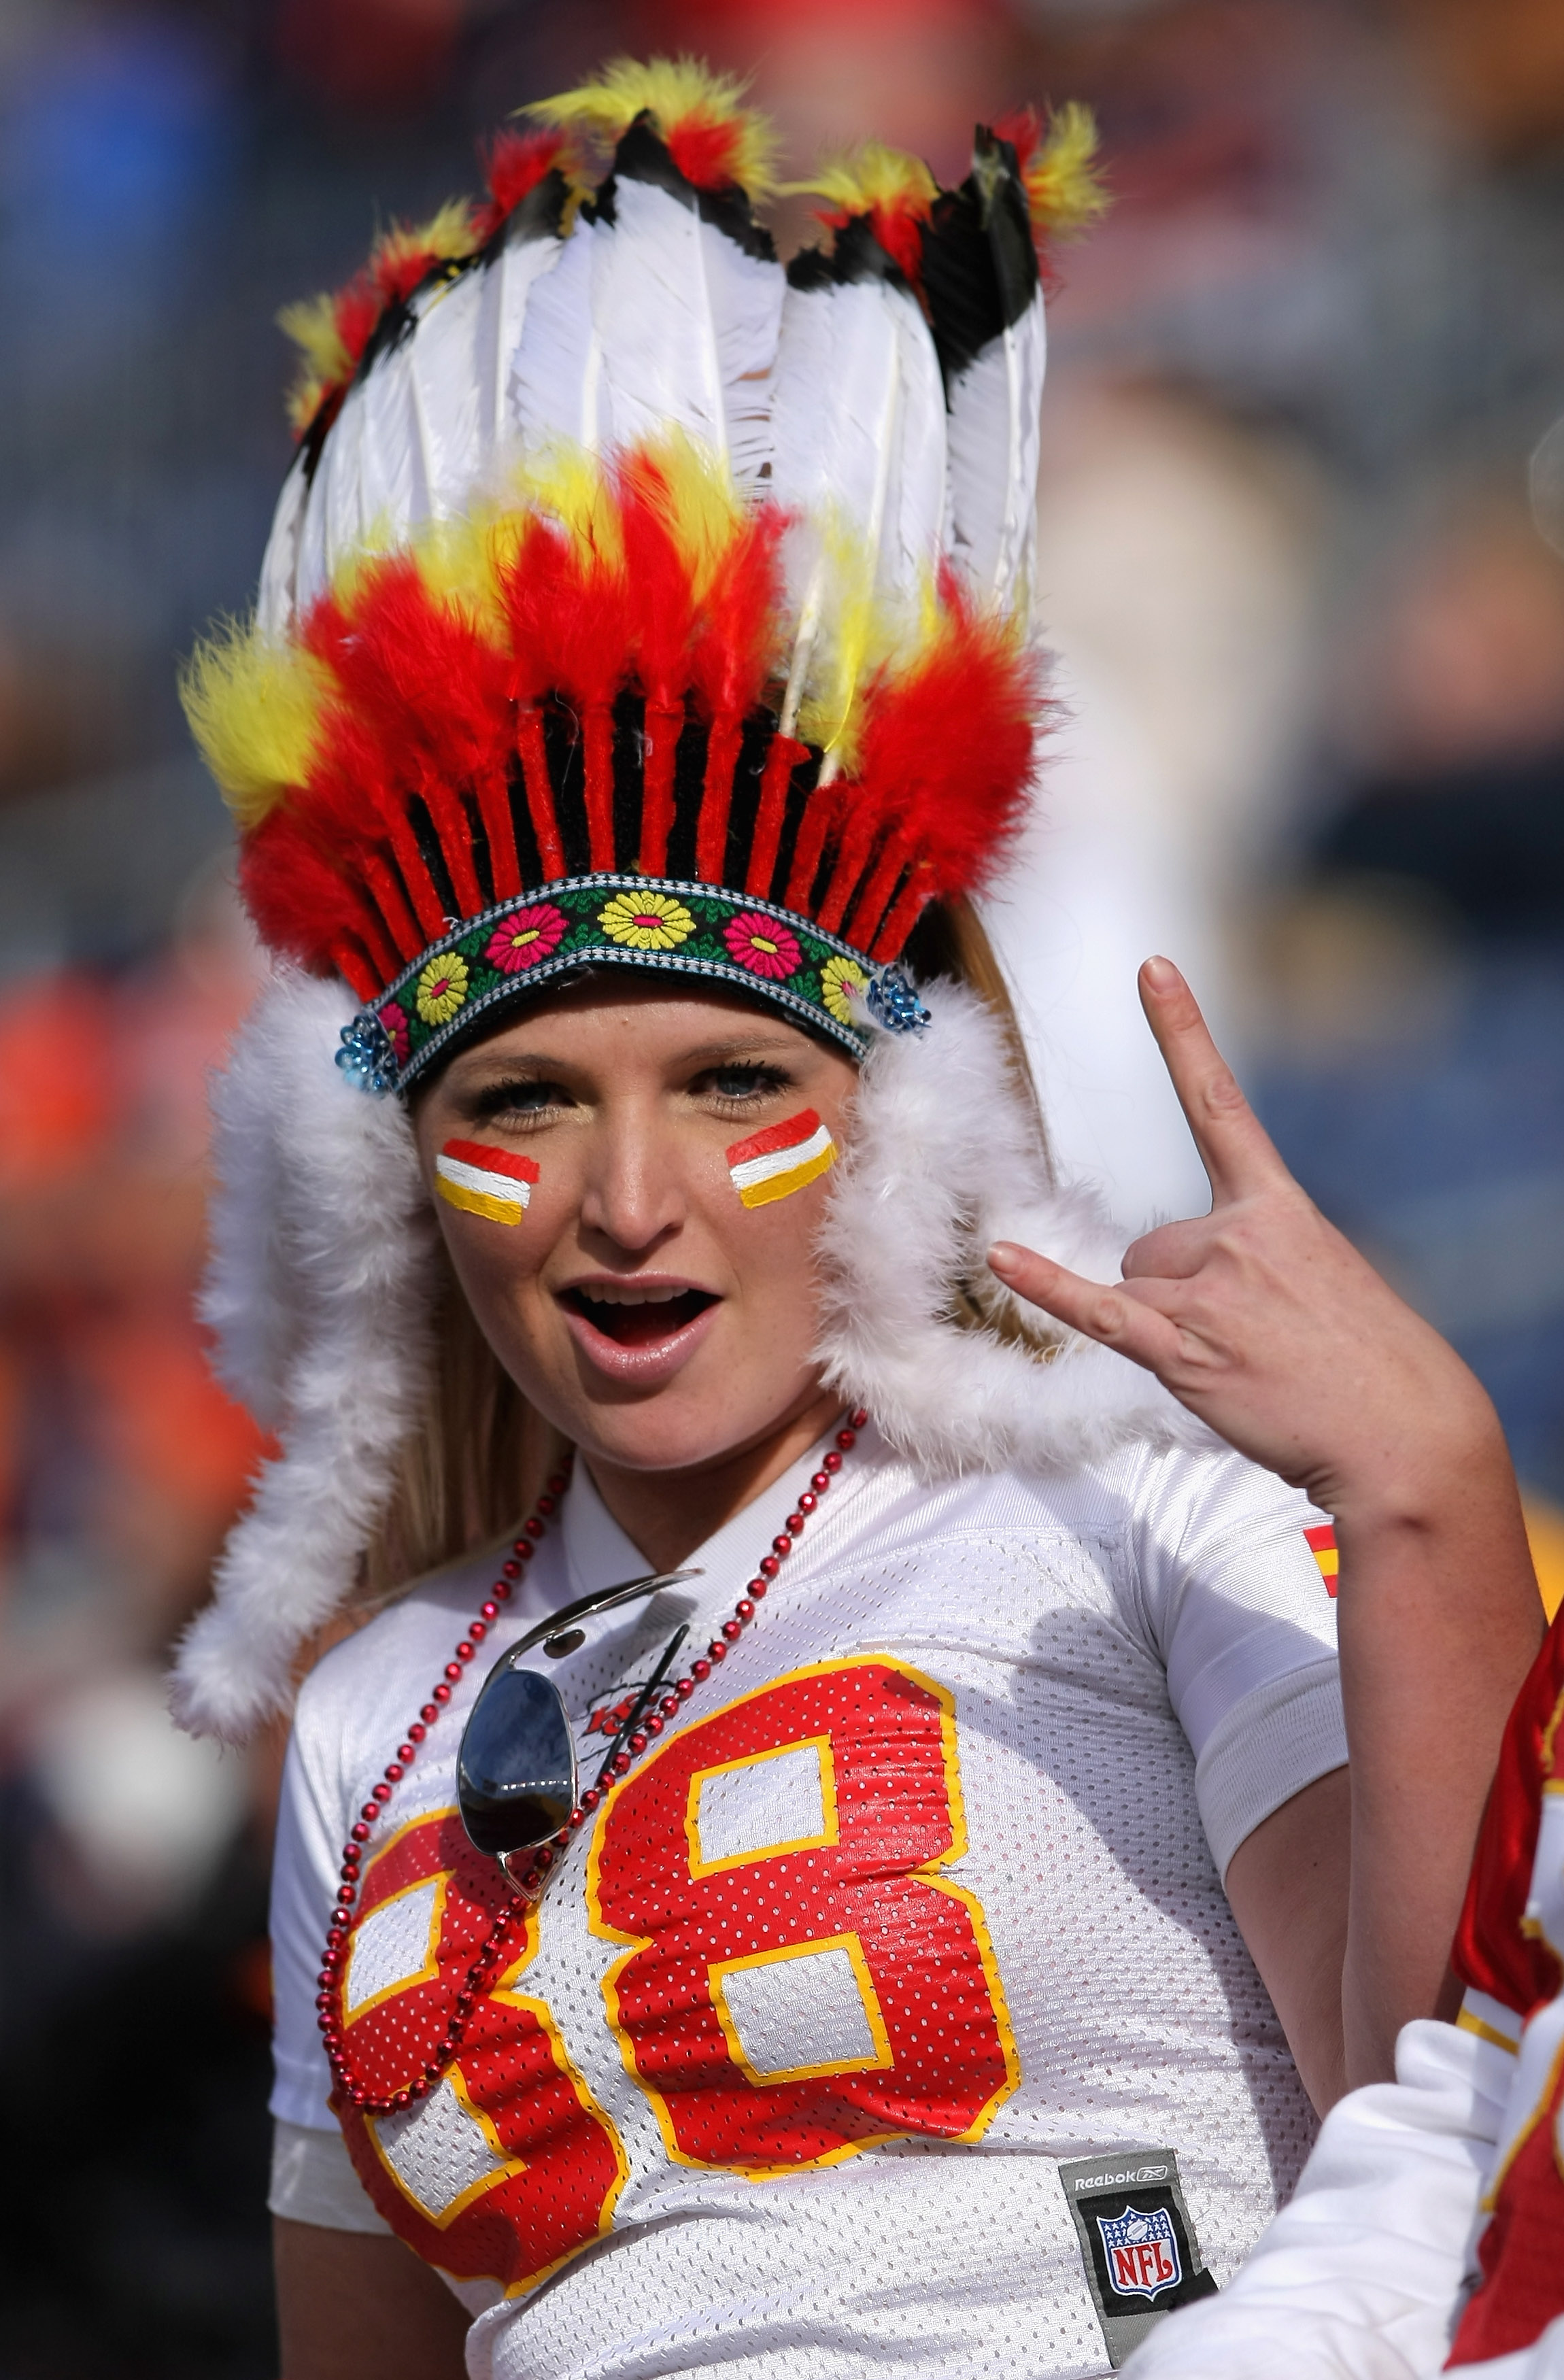 DENVER - NOVEMBER 14:  Kate Christian of Denver, Colorado supports the Kansas City Chiefs as they face the Denver Broncos at INVESCO Field at Mile High on November 14, 2010 in Denver, Colorado.  (Photo by Doug Pensinger/Getty Images)